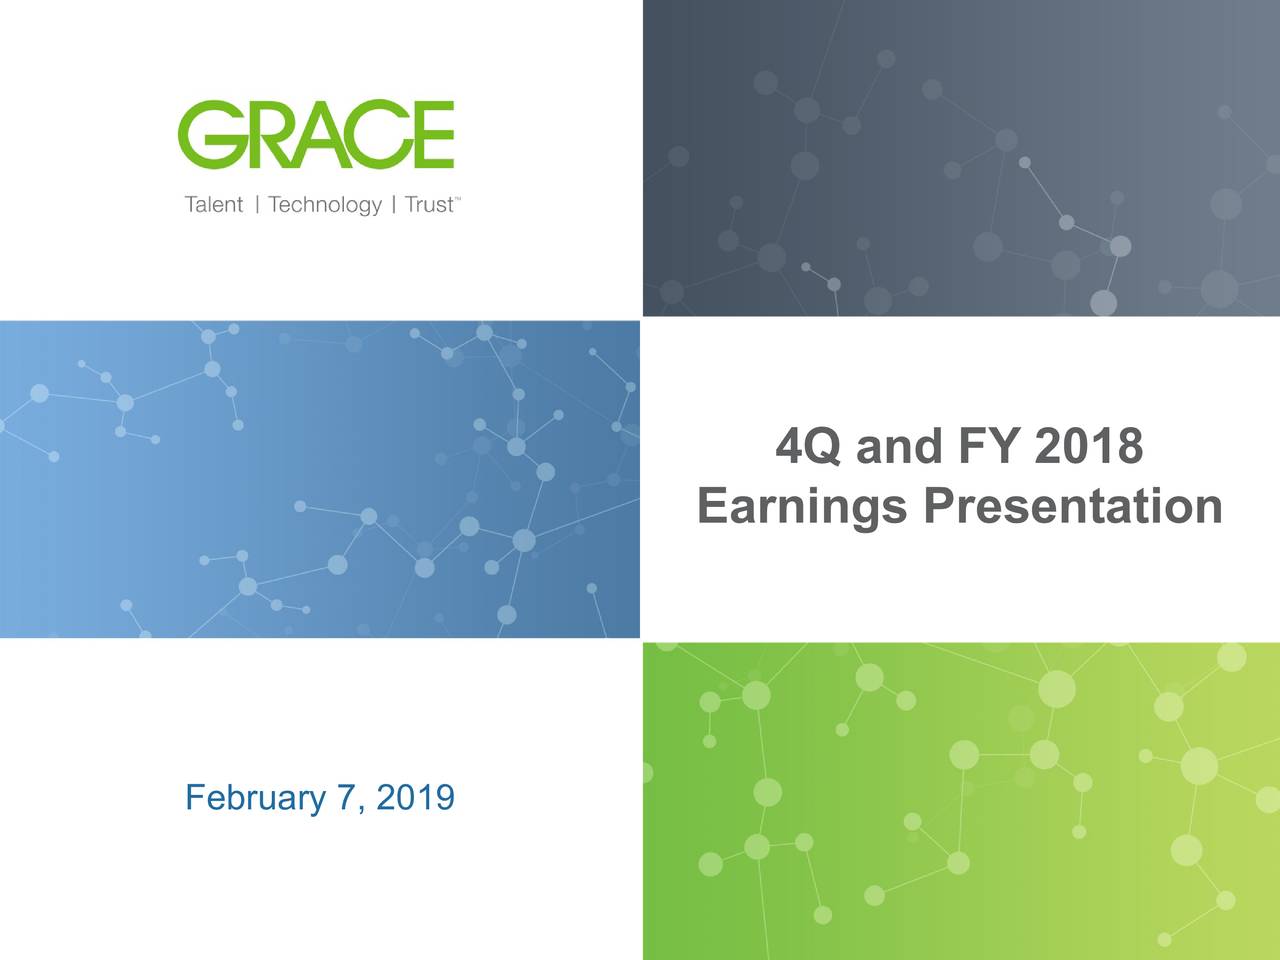 4Q and FY 2018